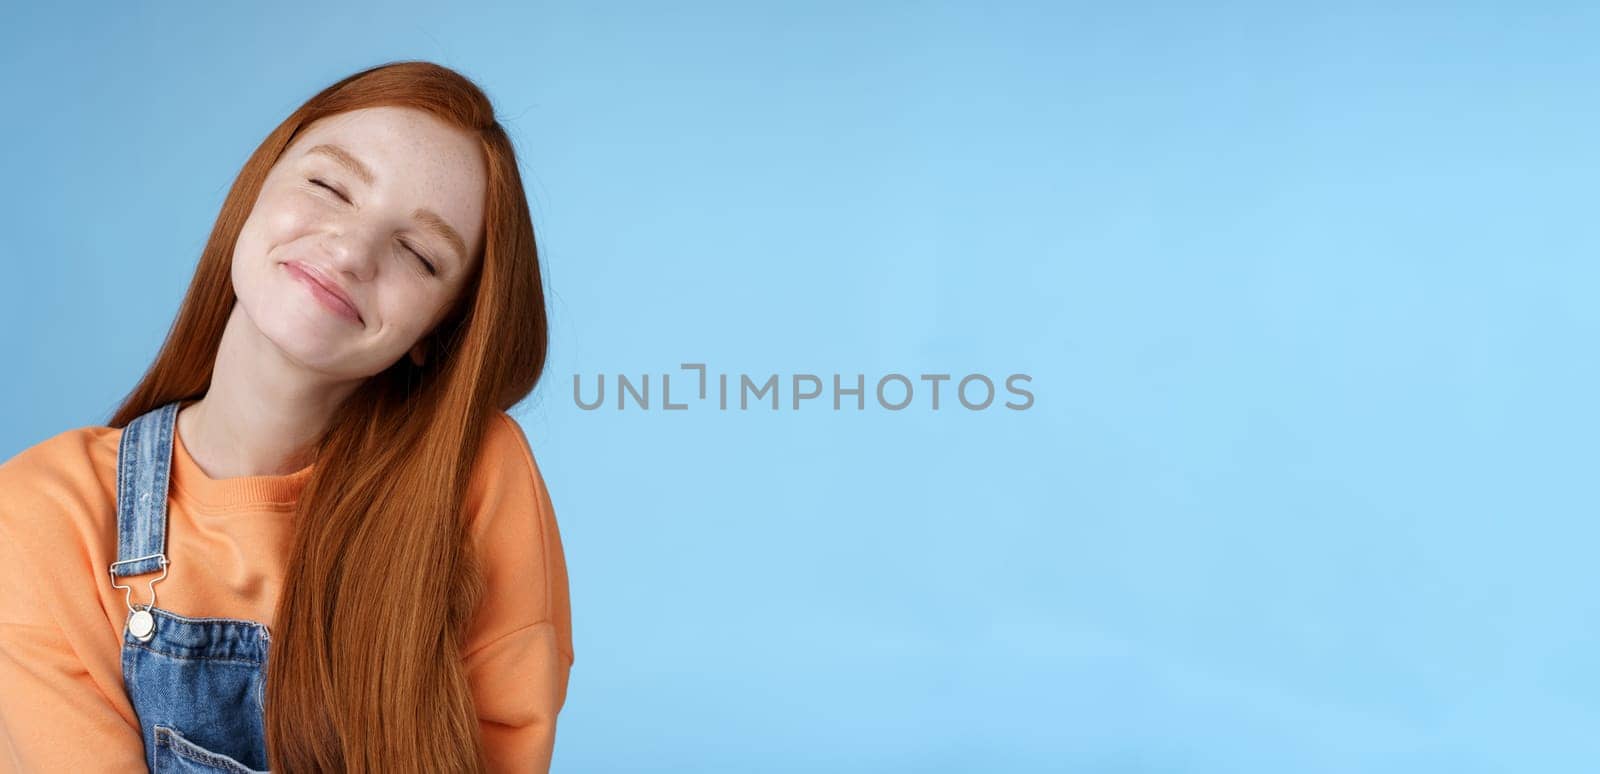 Dreamy kind silly redhead smiling happy girl straight long ginger hair daydreaming imagine romantic moment close eyes smiling delighted tilting head look joyful, standing blue background.